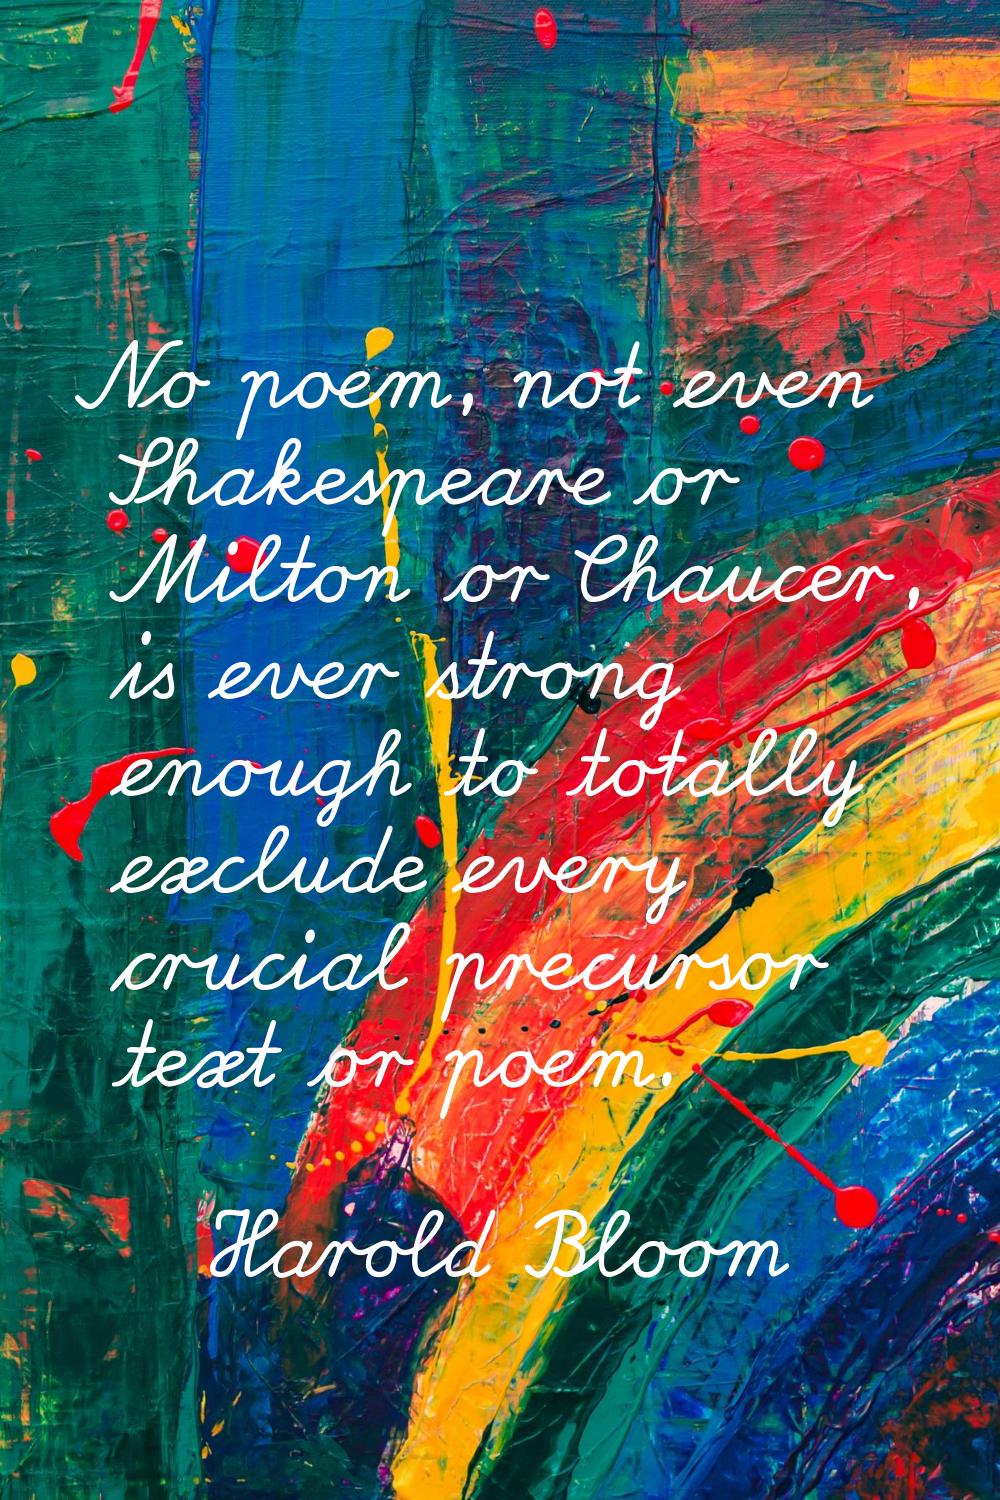 No poem, not even Shakespeare or Milton or Chaucer, is ever strong enough to totally exclude every 